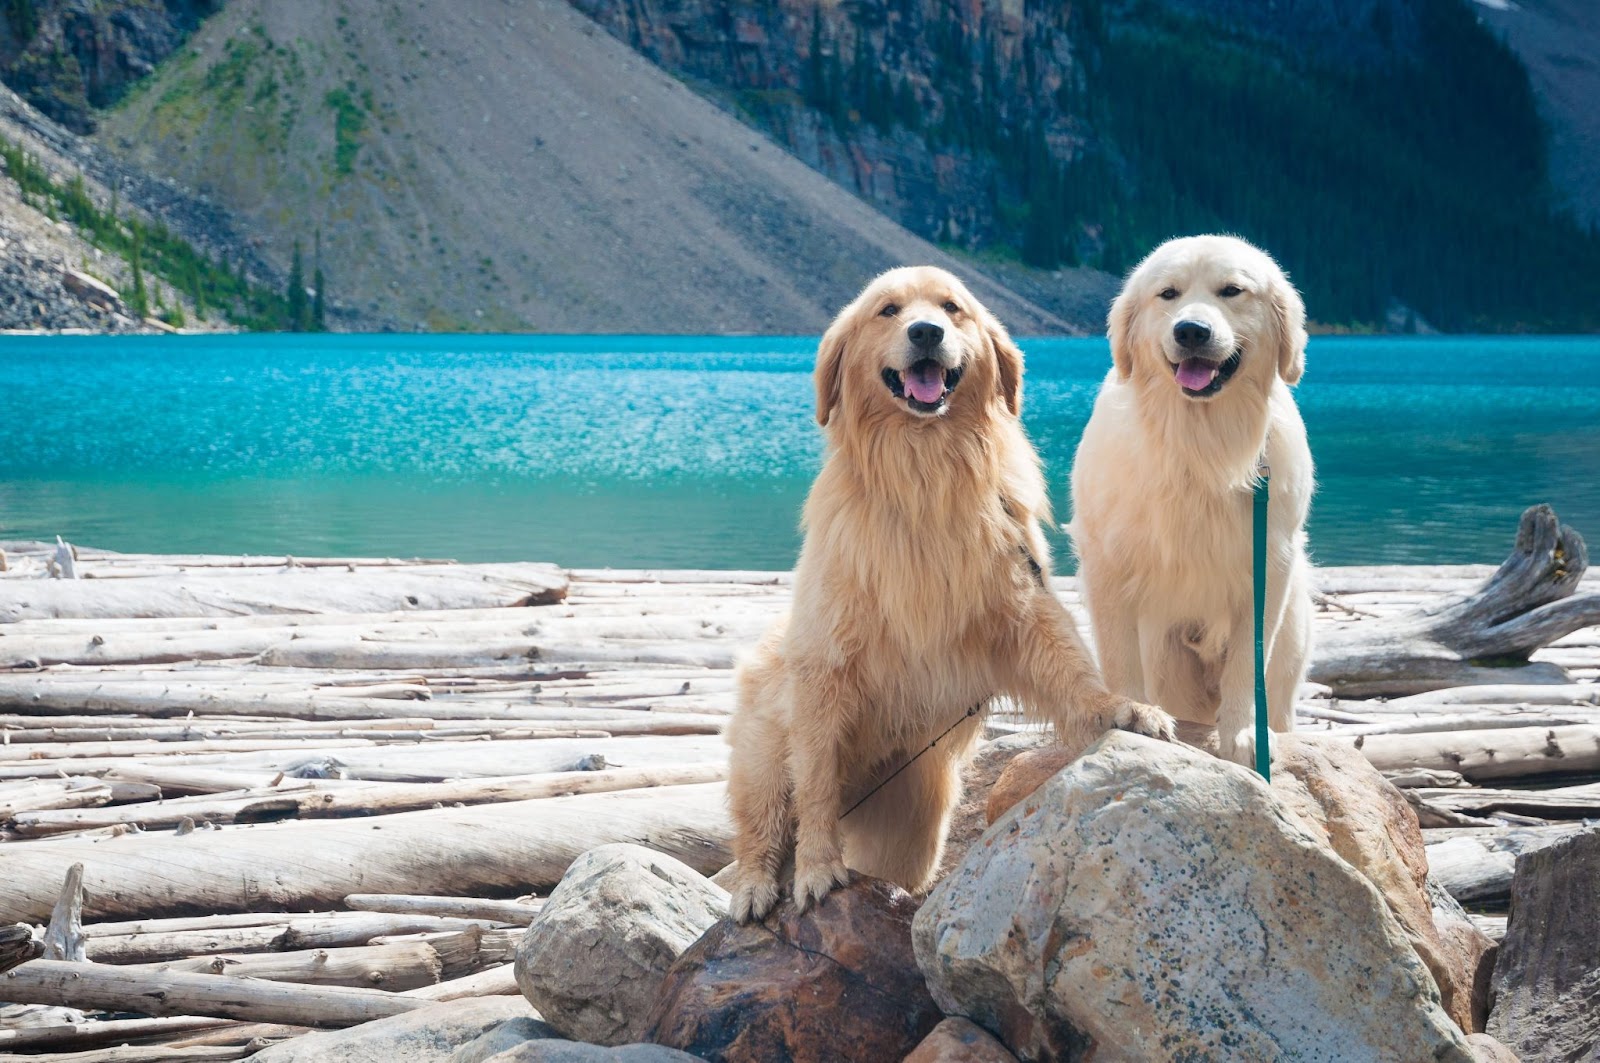 The Canadian Type Of Golden Retriever. Two of them hanging at a lake.